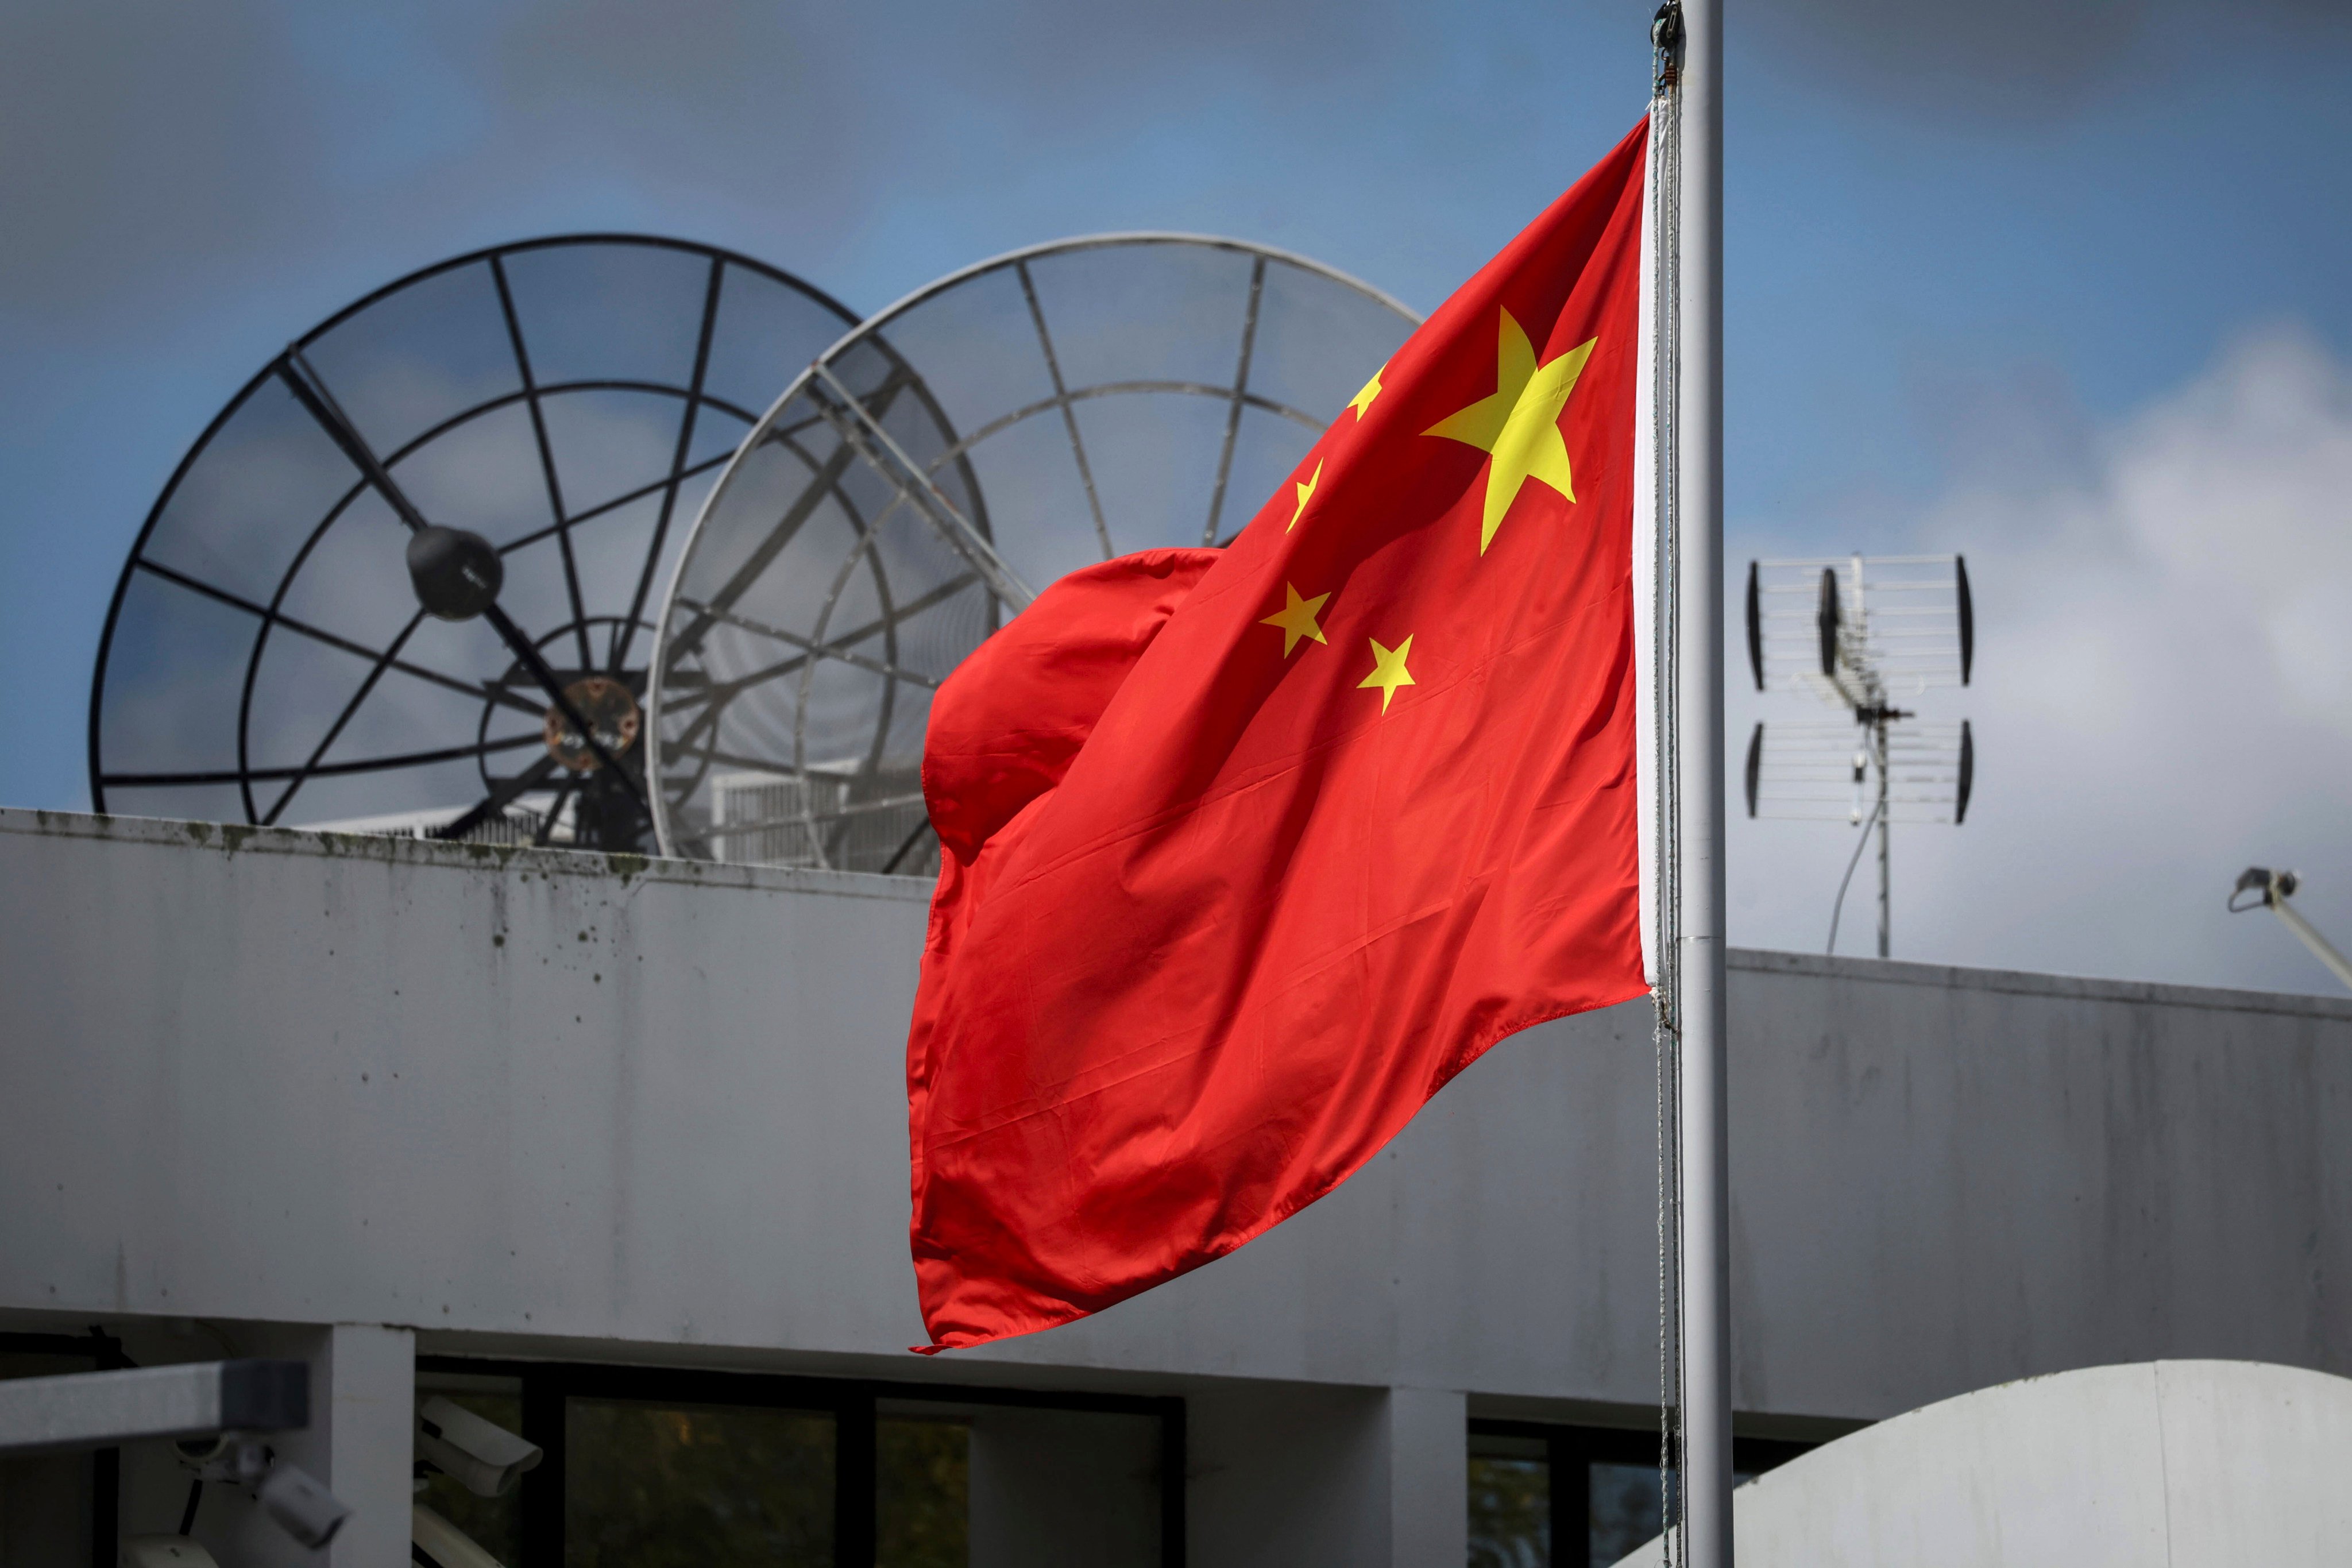 The Chinese flag flies at the Chinese consulate in Auckland, New Zealand, on Tuesday. Photo: New Zealand Herald via AP